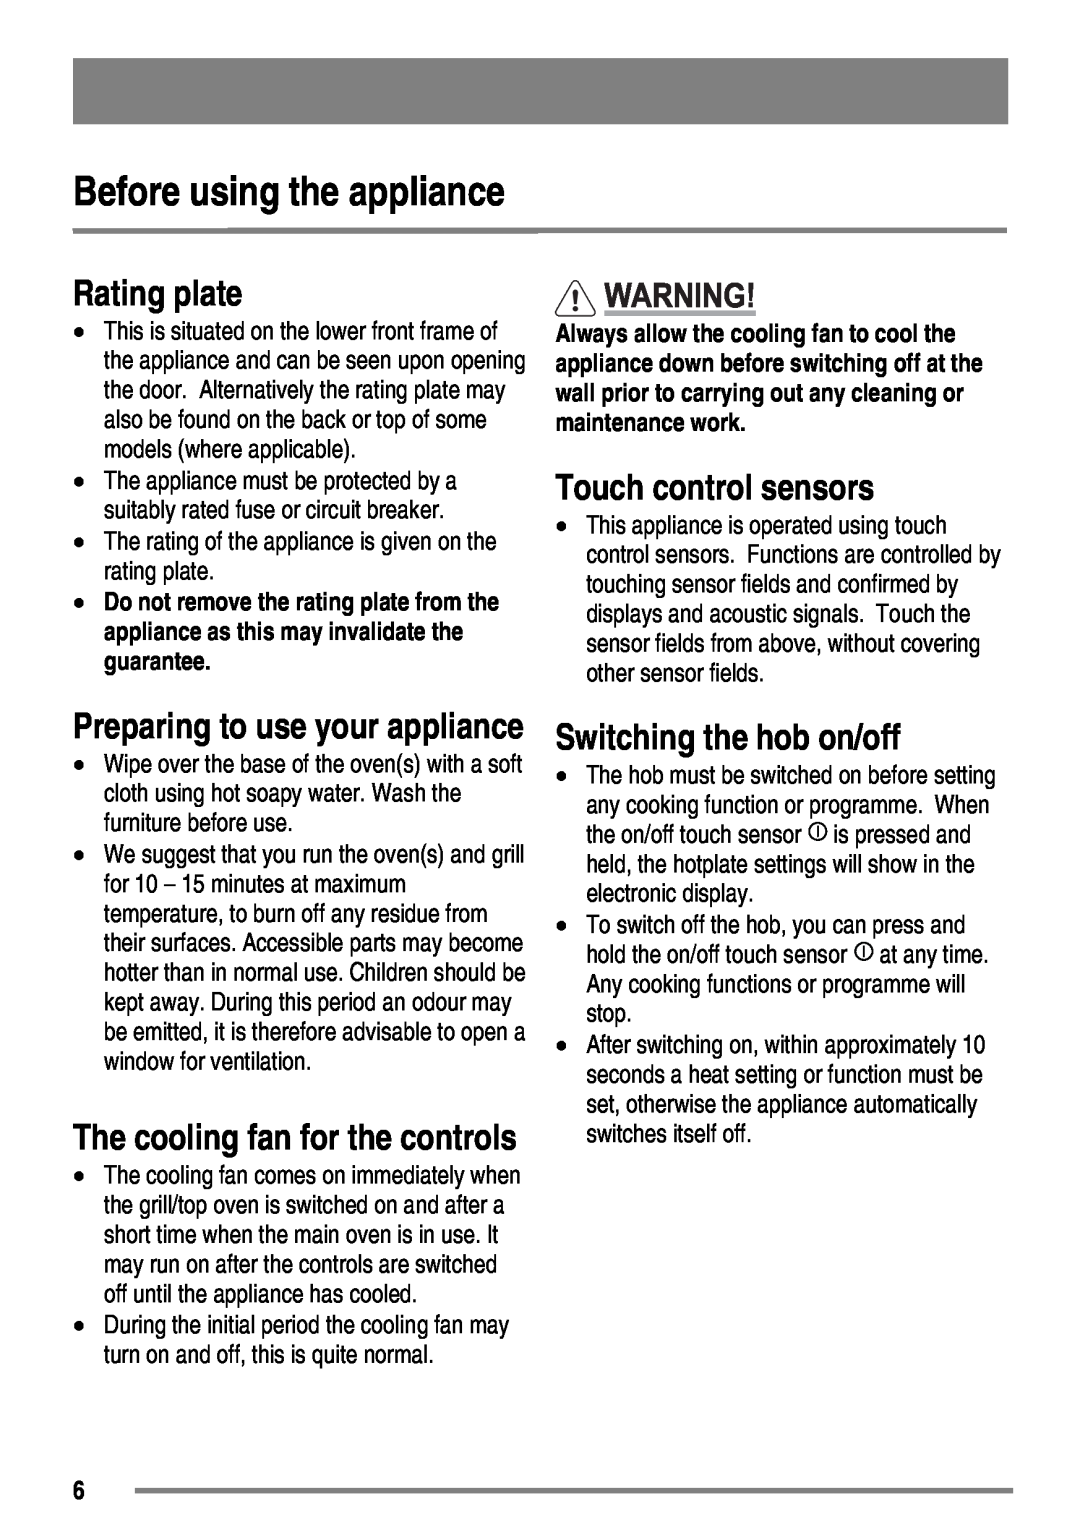 Zanussi ZKT6050 user manual Before using the appliance, Rating plate, Touch control sensors, Switching the hob on/off 